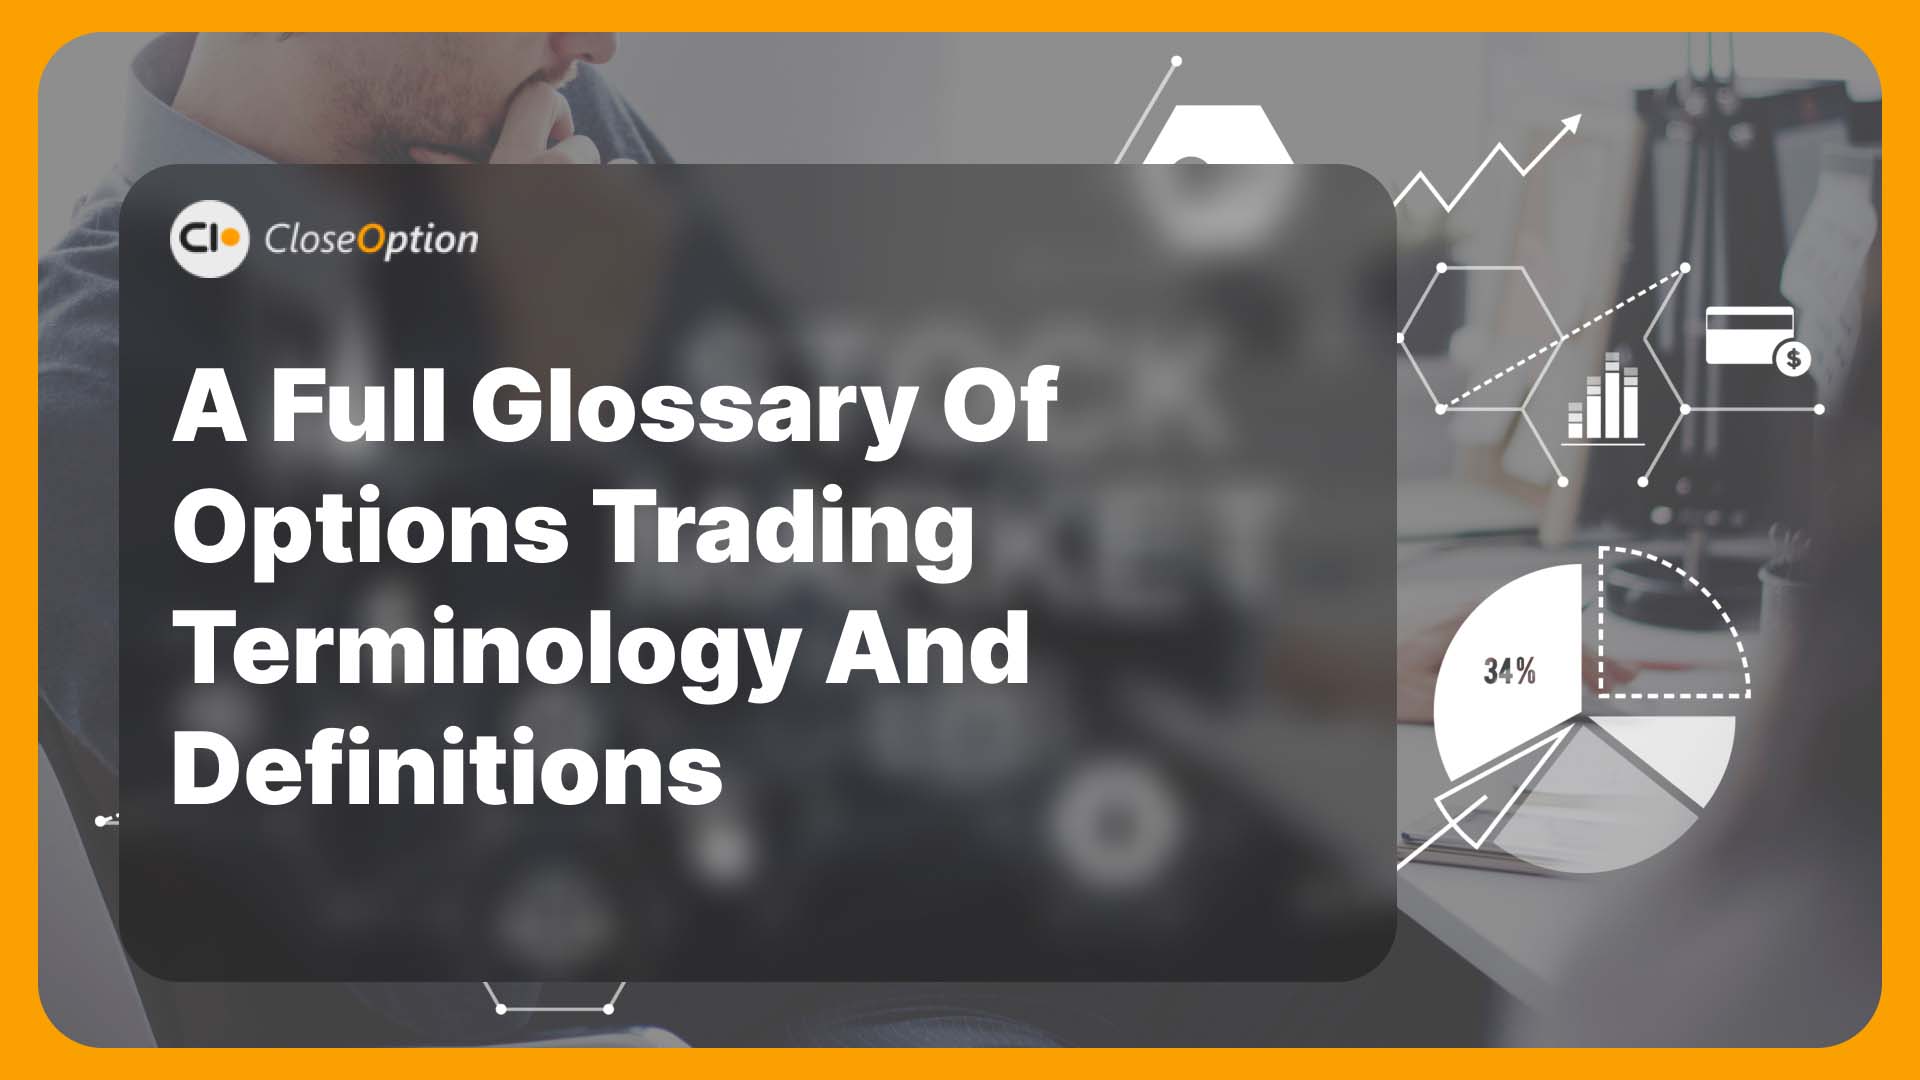 A full Glossary of Options Trading Terminology and Definitions